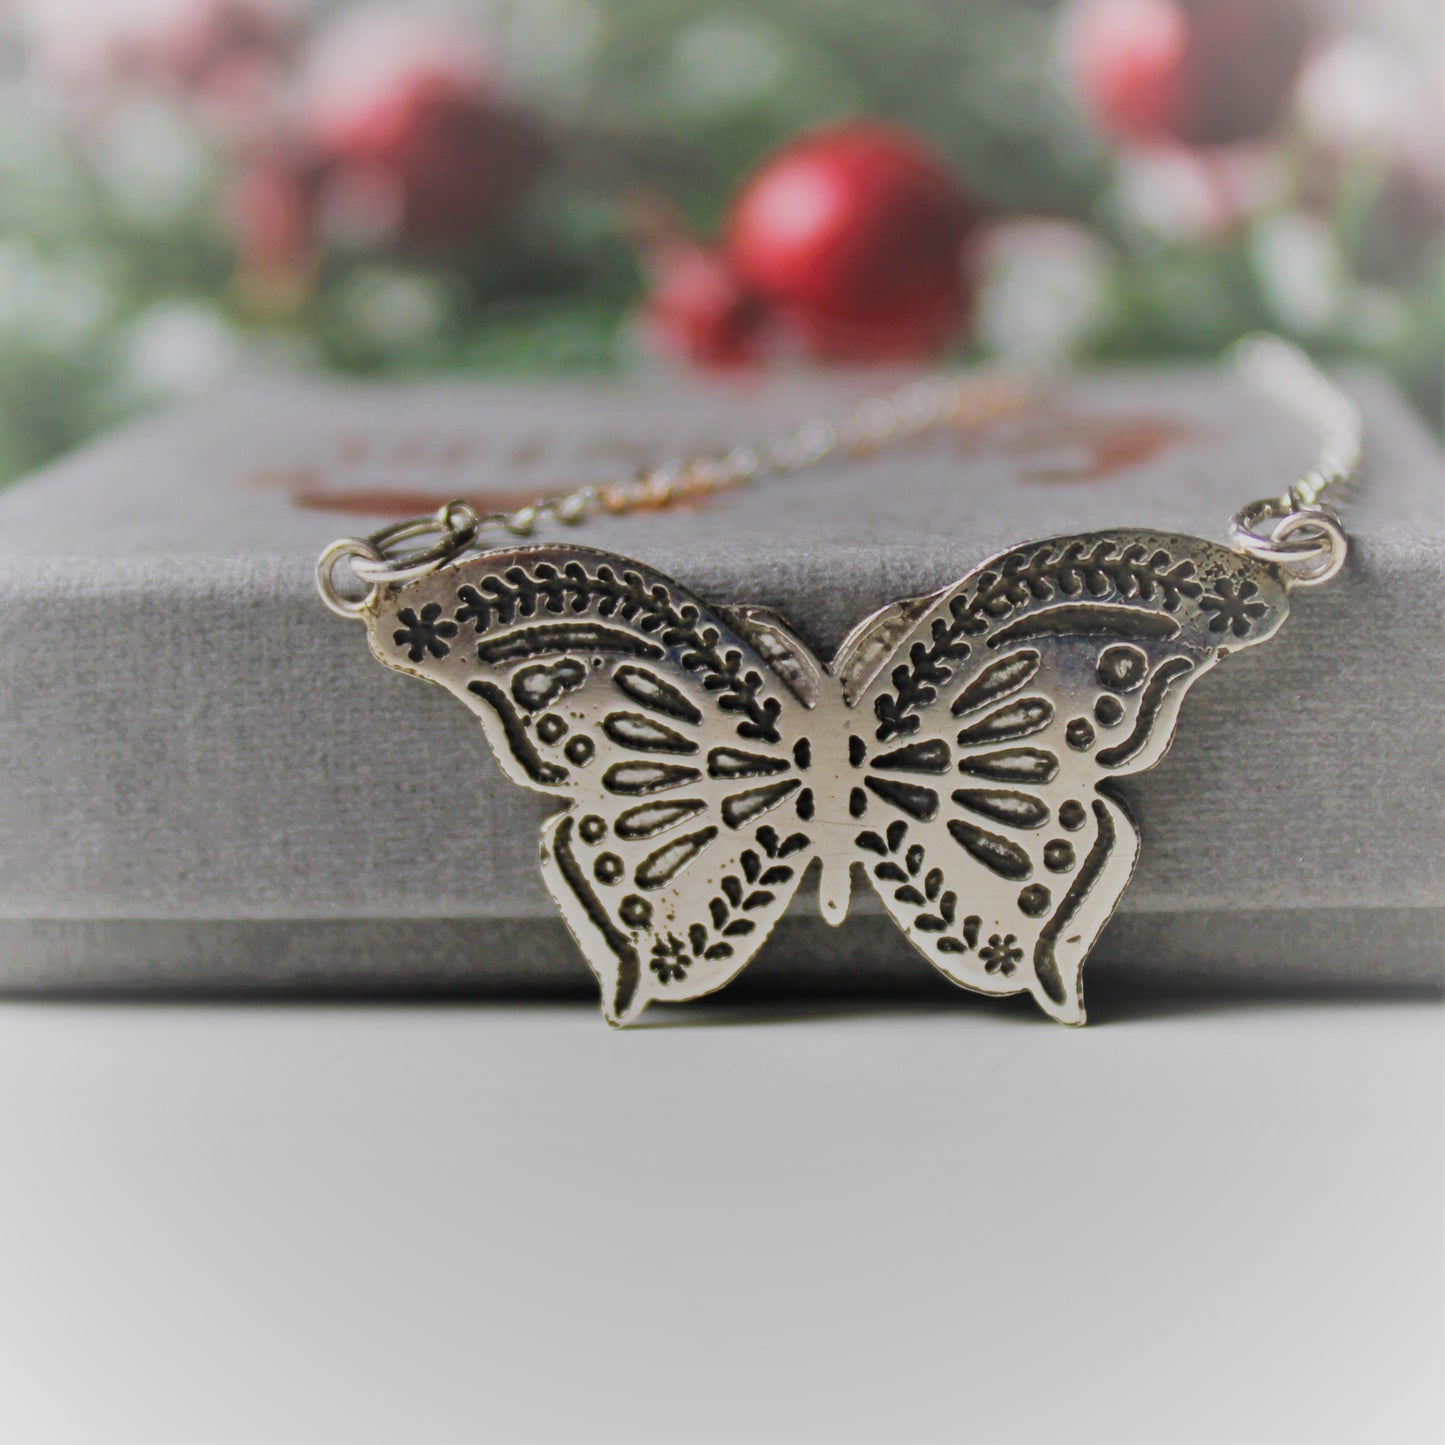 Handmade Sterling Silver Butterfly Necklace by Shine On